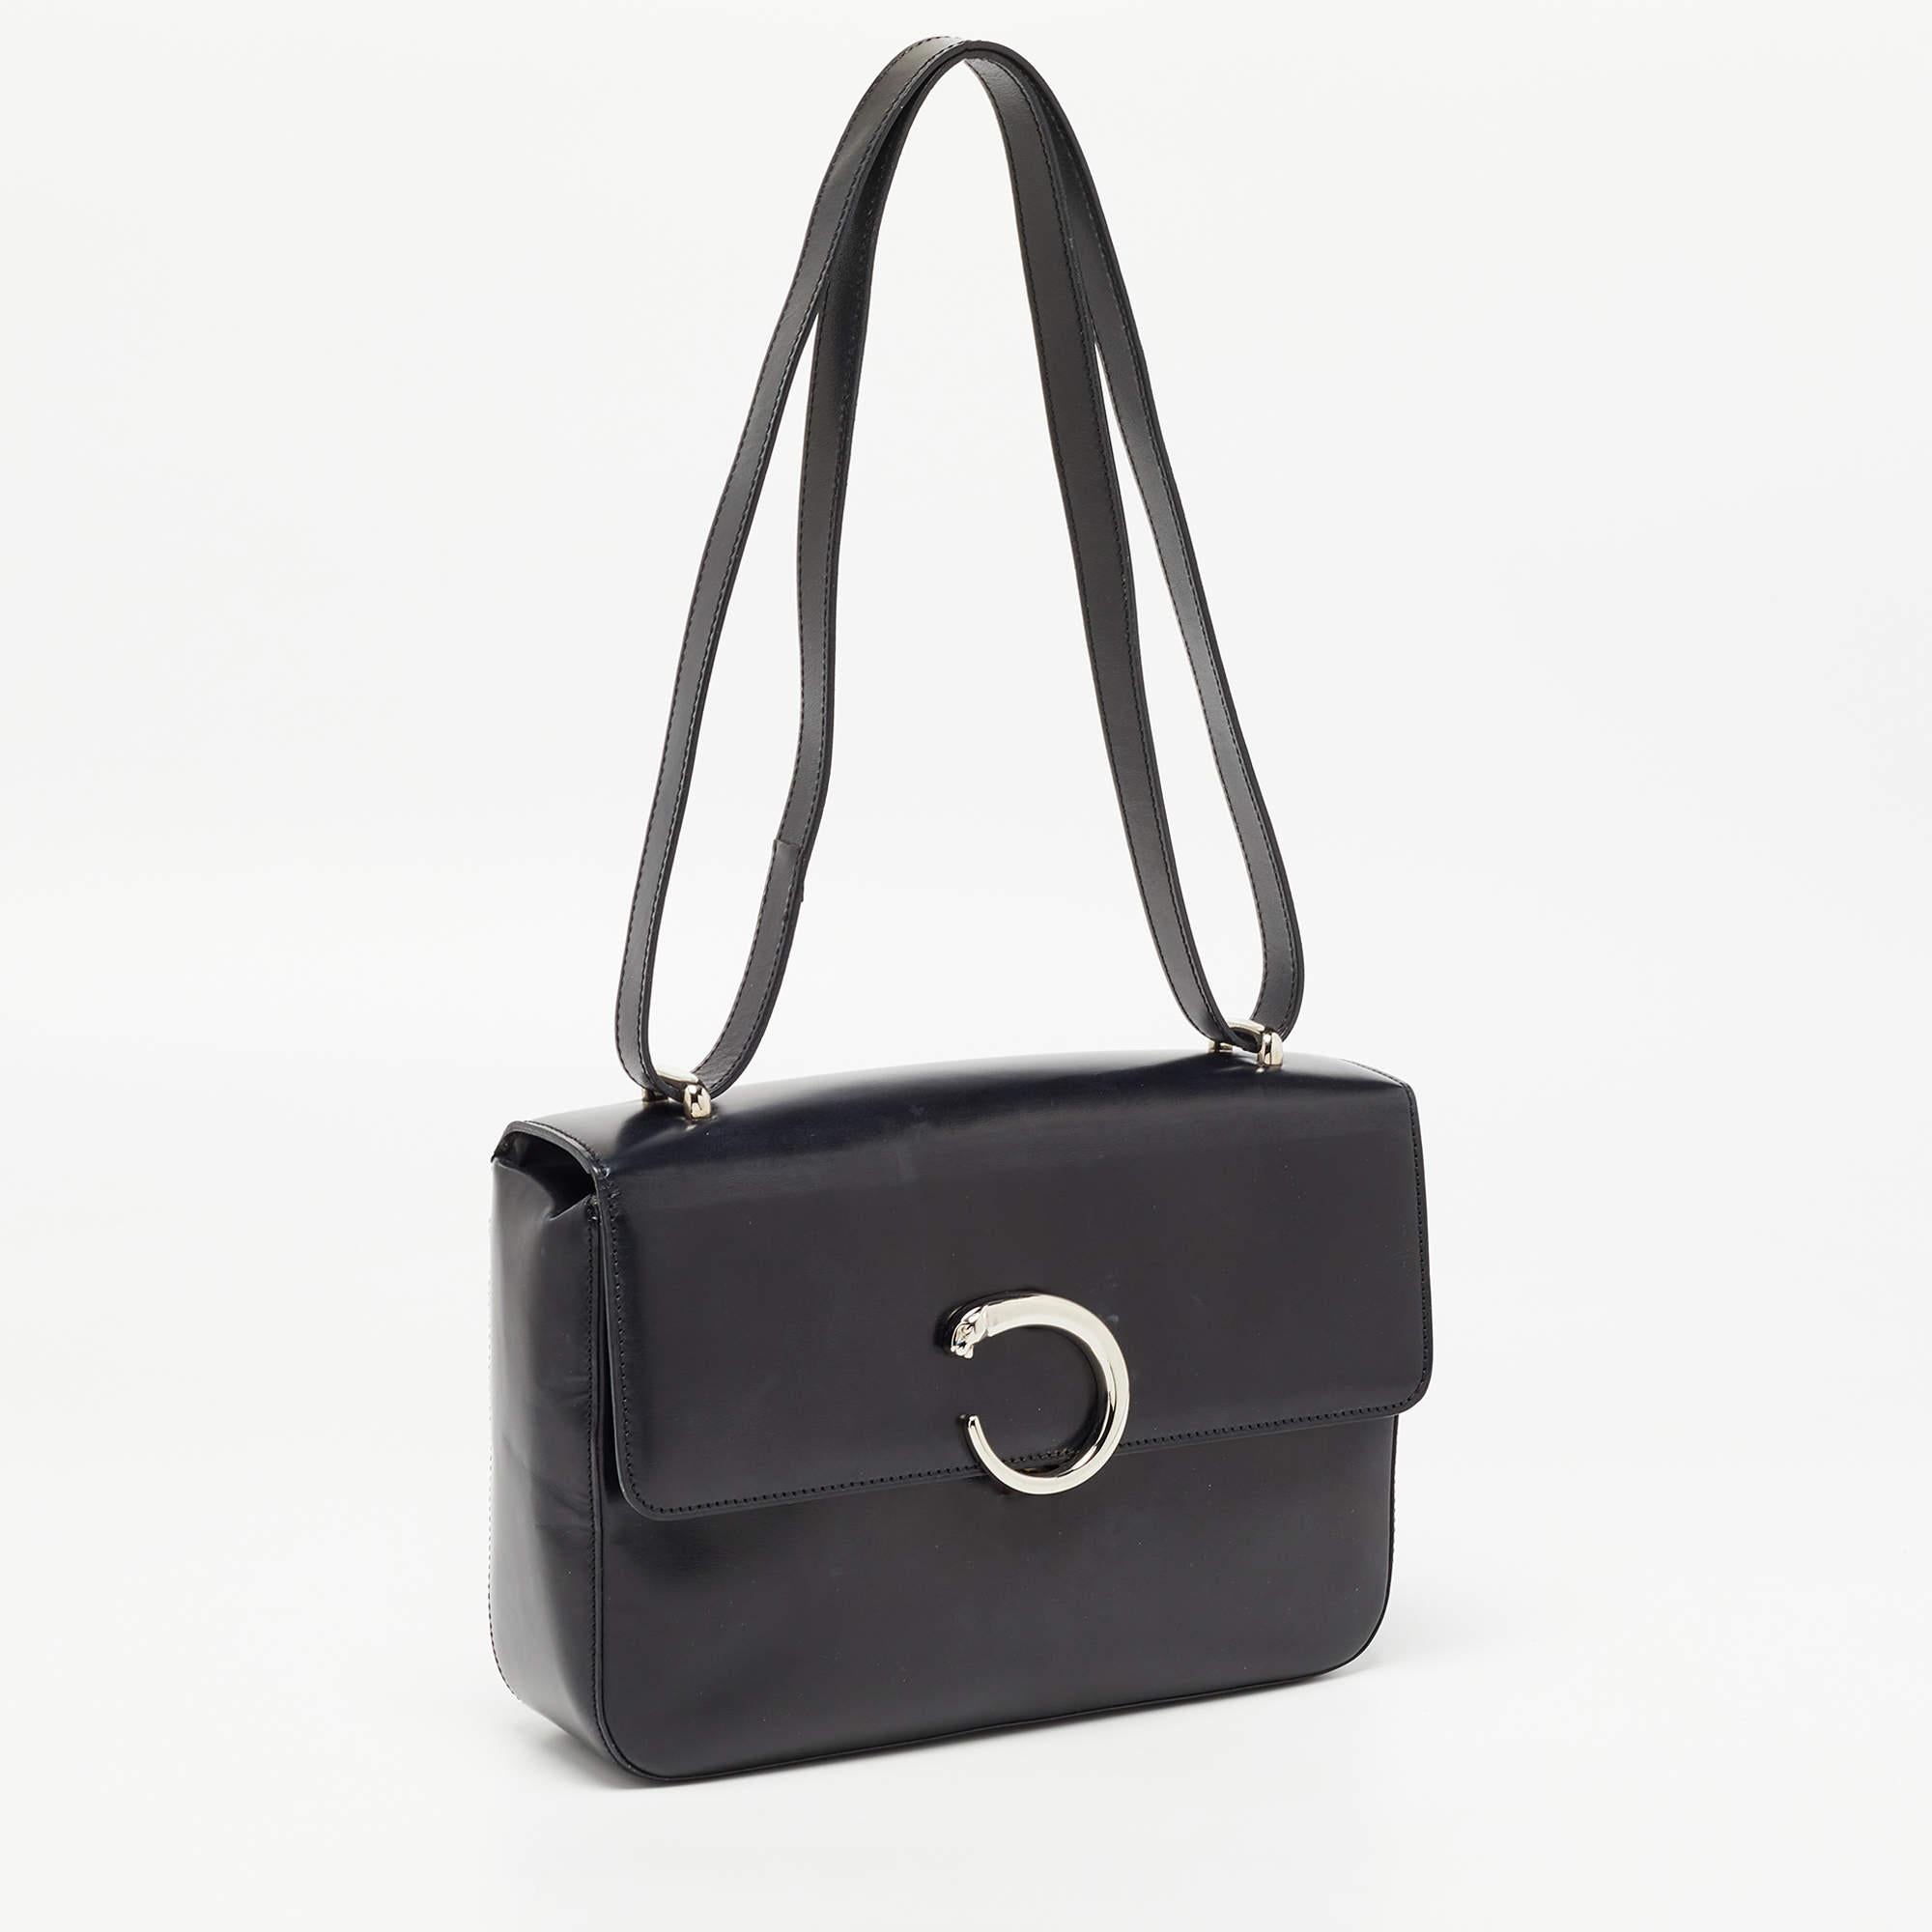 Women's Cartier Black Glossy Leather Panthere Shoulder Bag